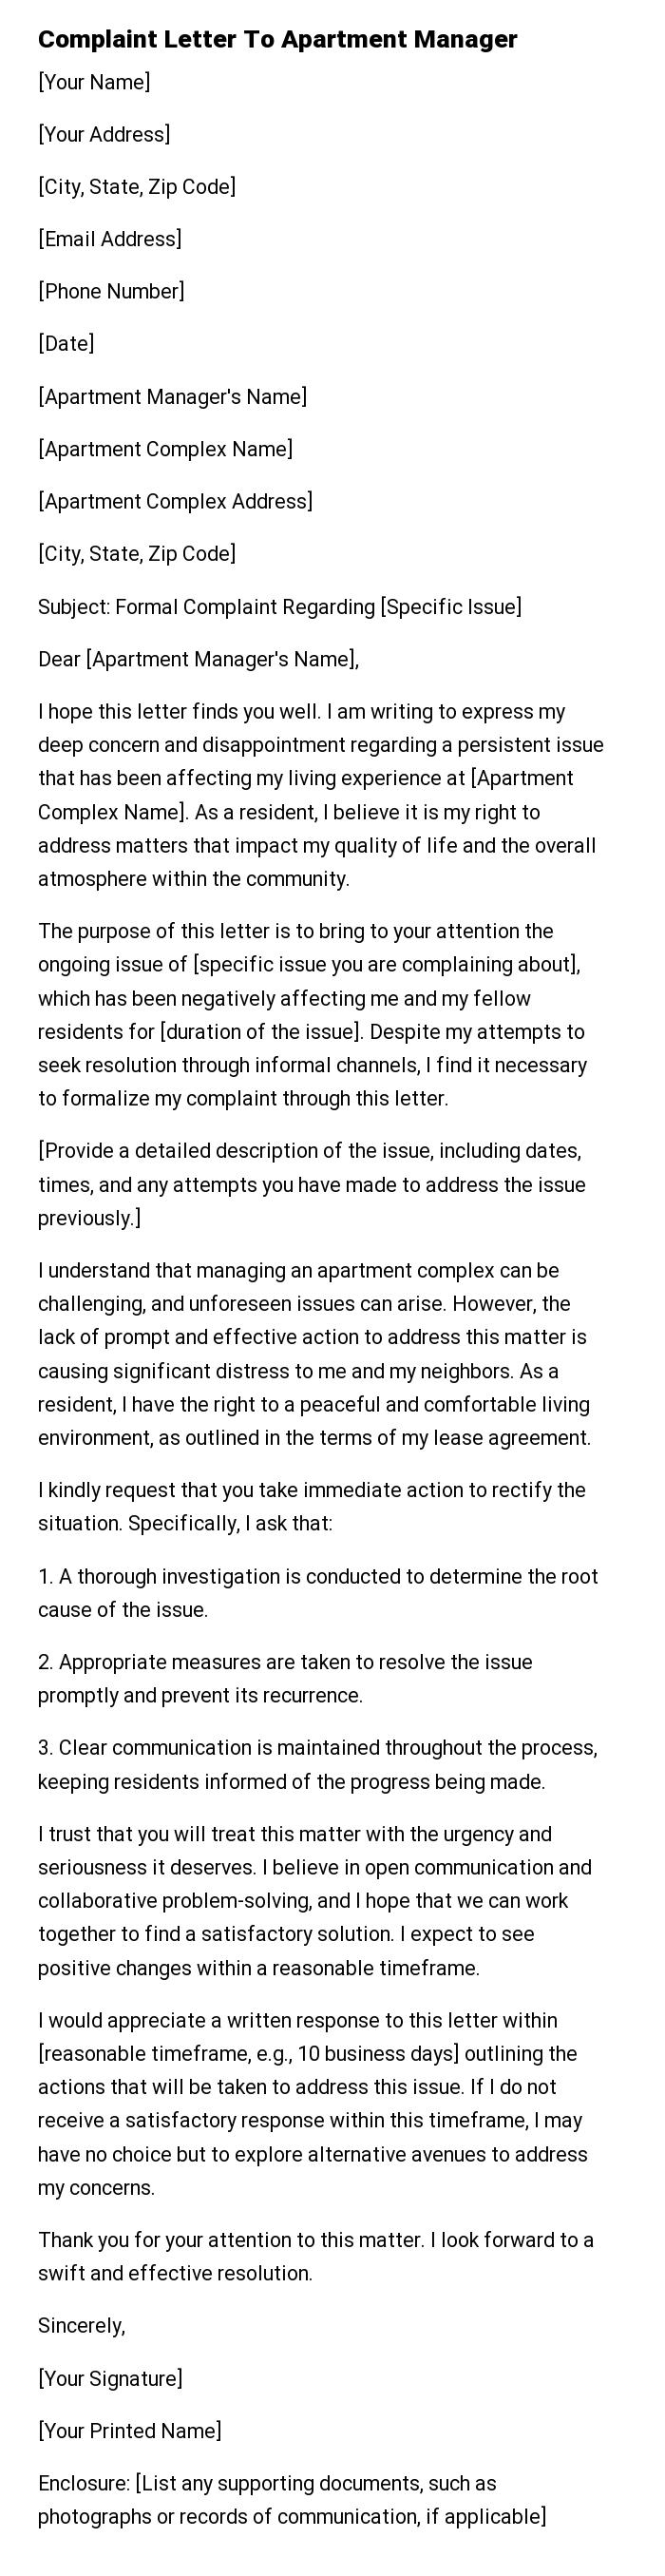 Complaint Letter To Apartment Manager